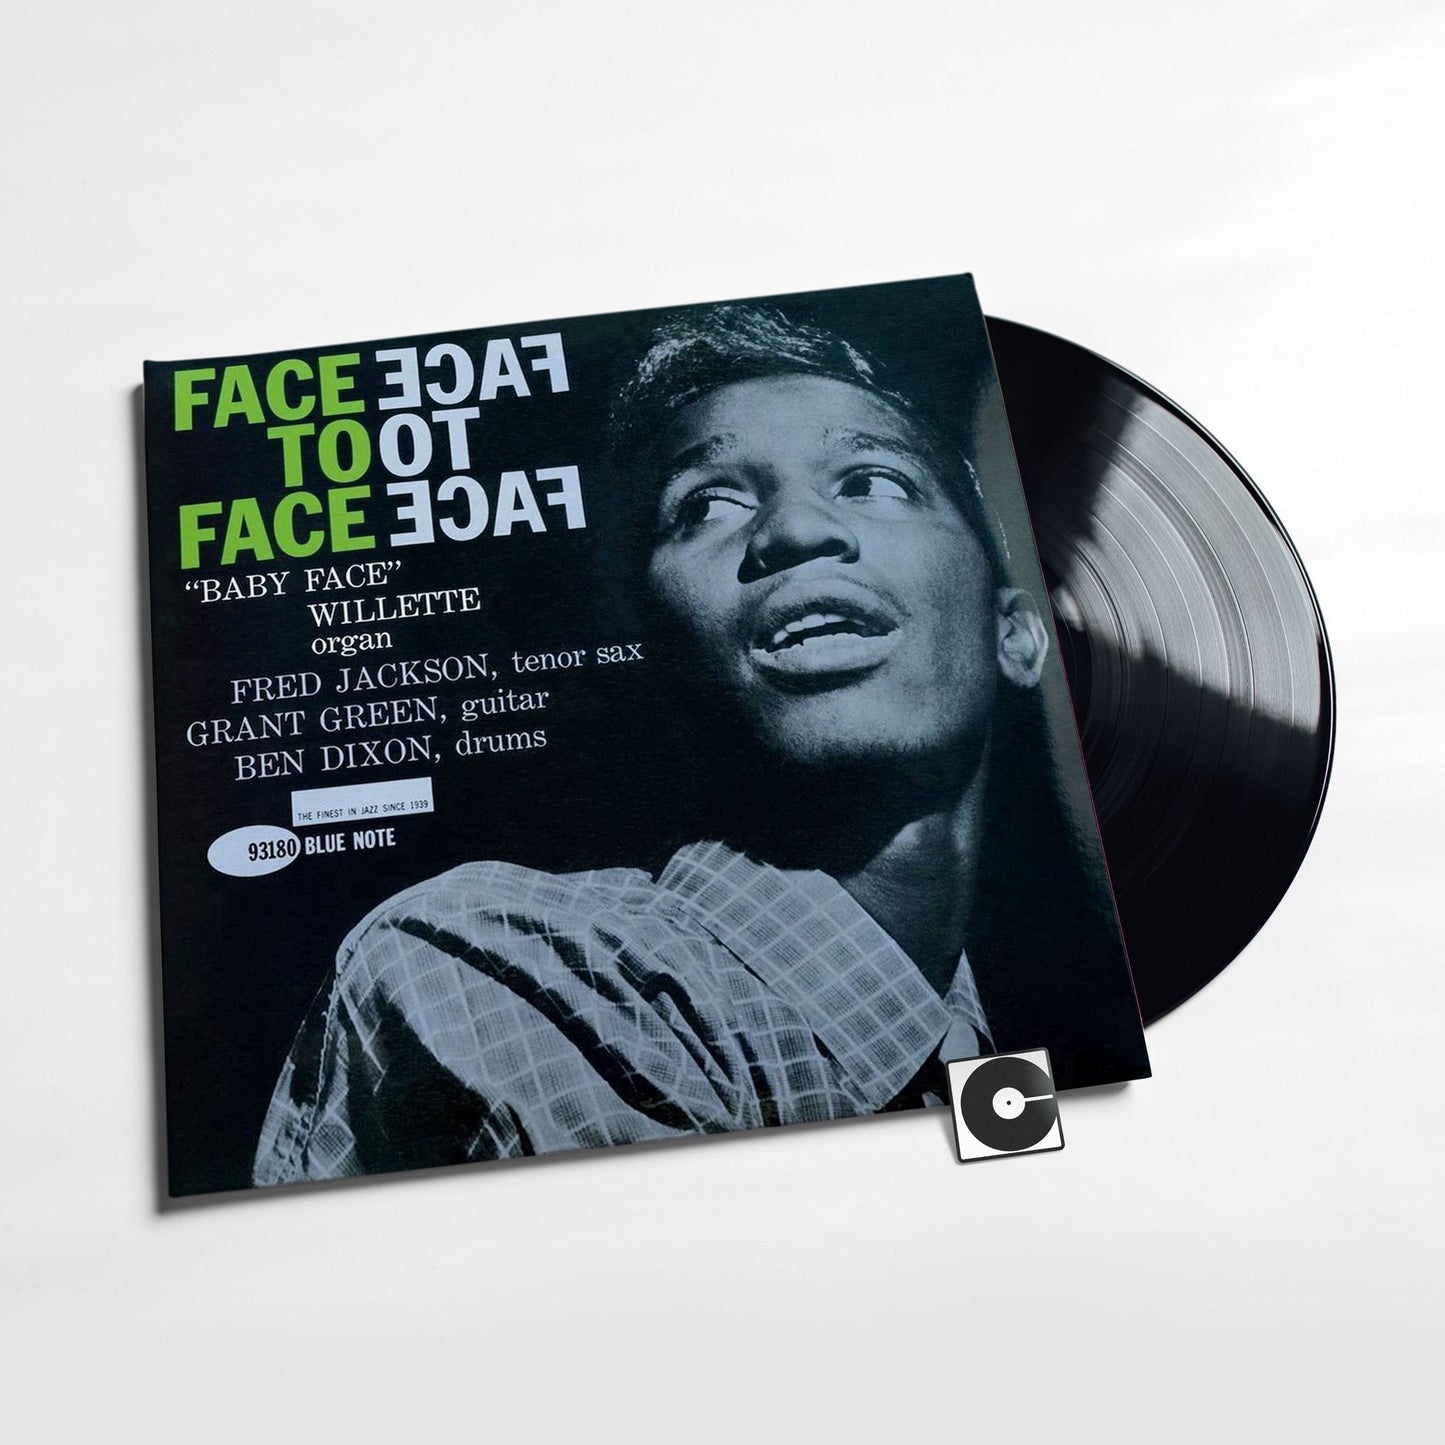 Baby Face Willette - "Face To Face" Tone Poet